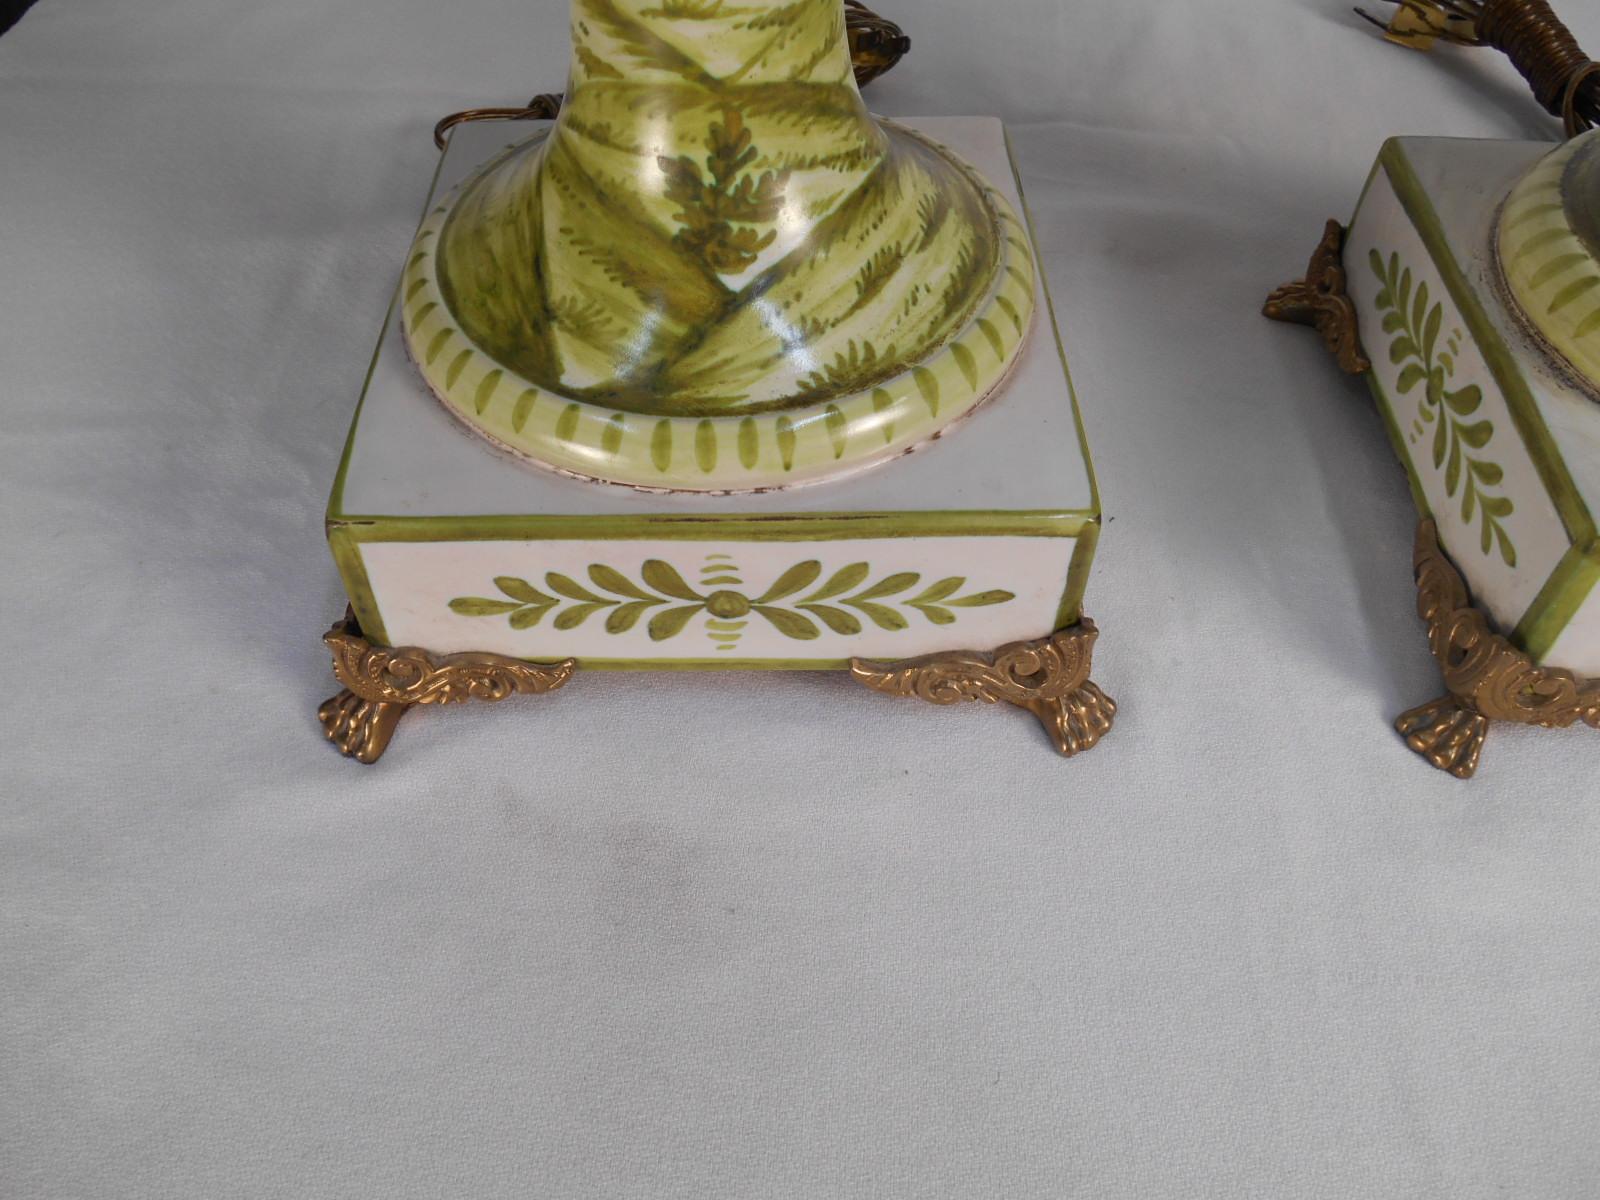 Mid-20th Century Early Marbro Urn Lamps with Green Painted Roman Ruins - a Pair For Sale